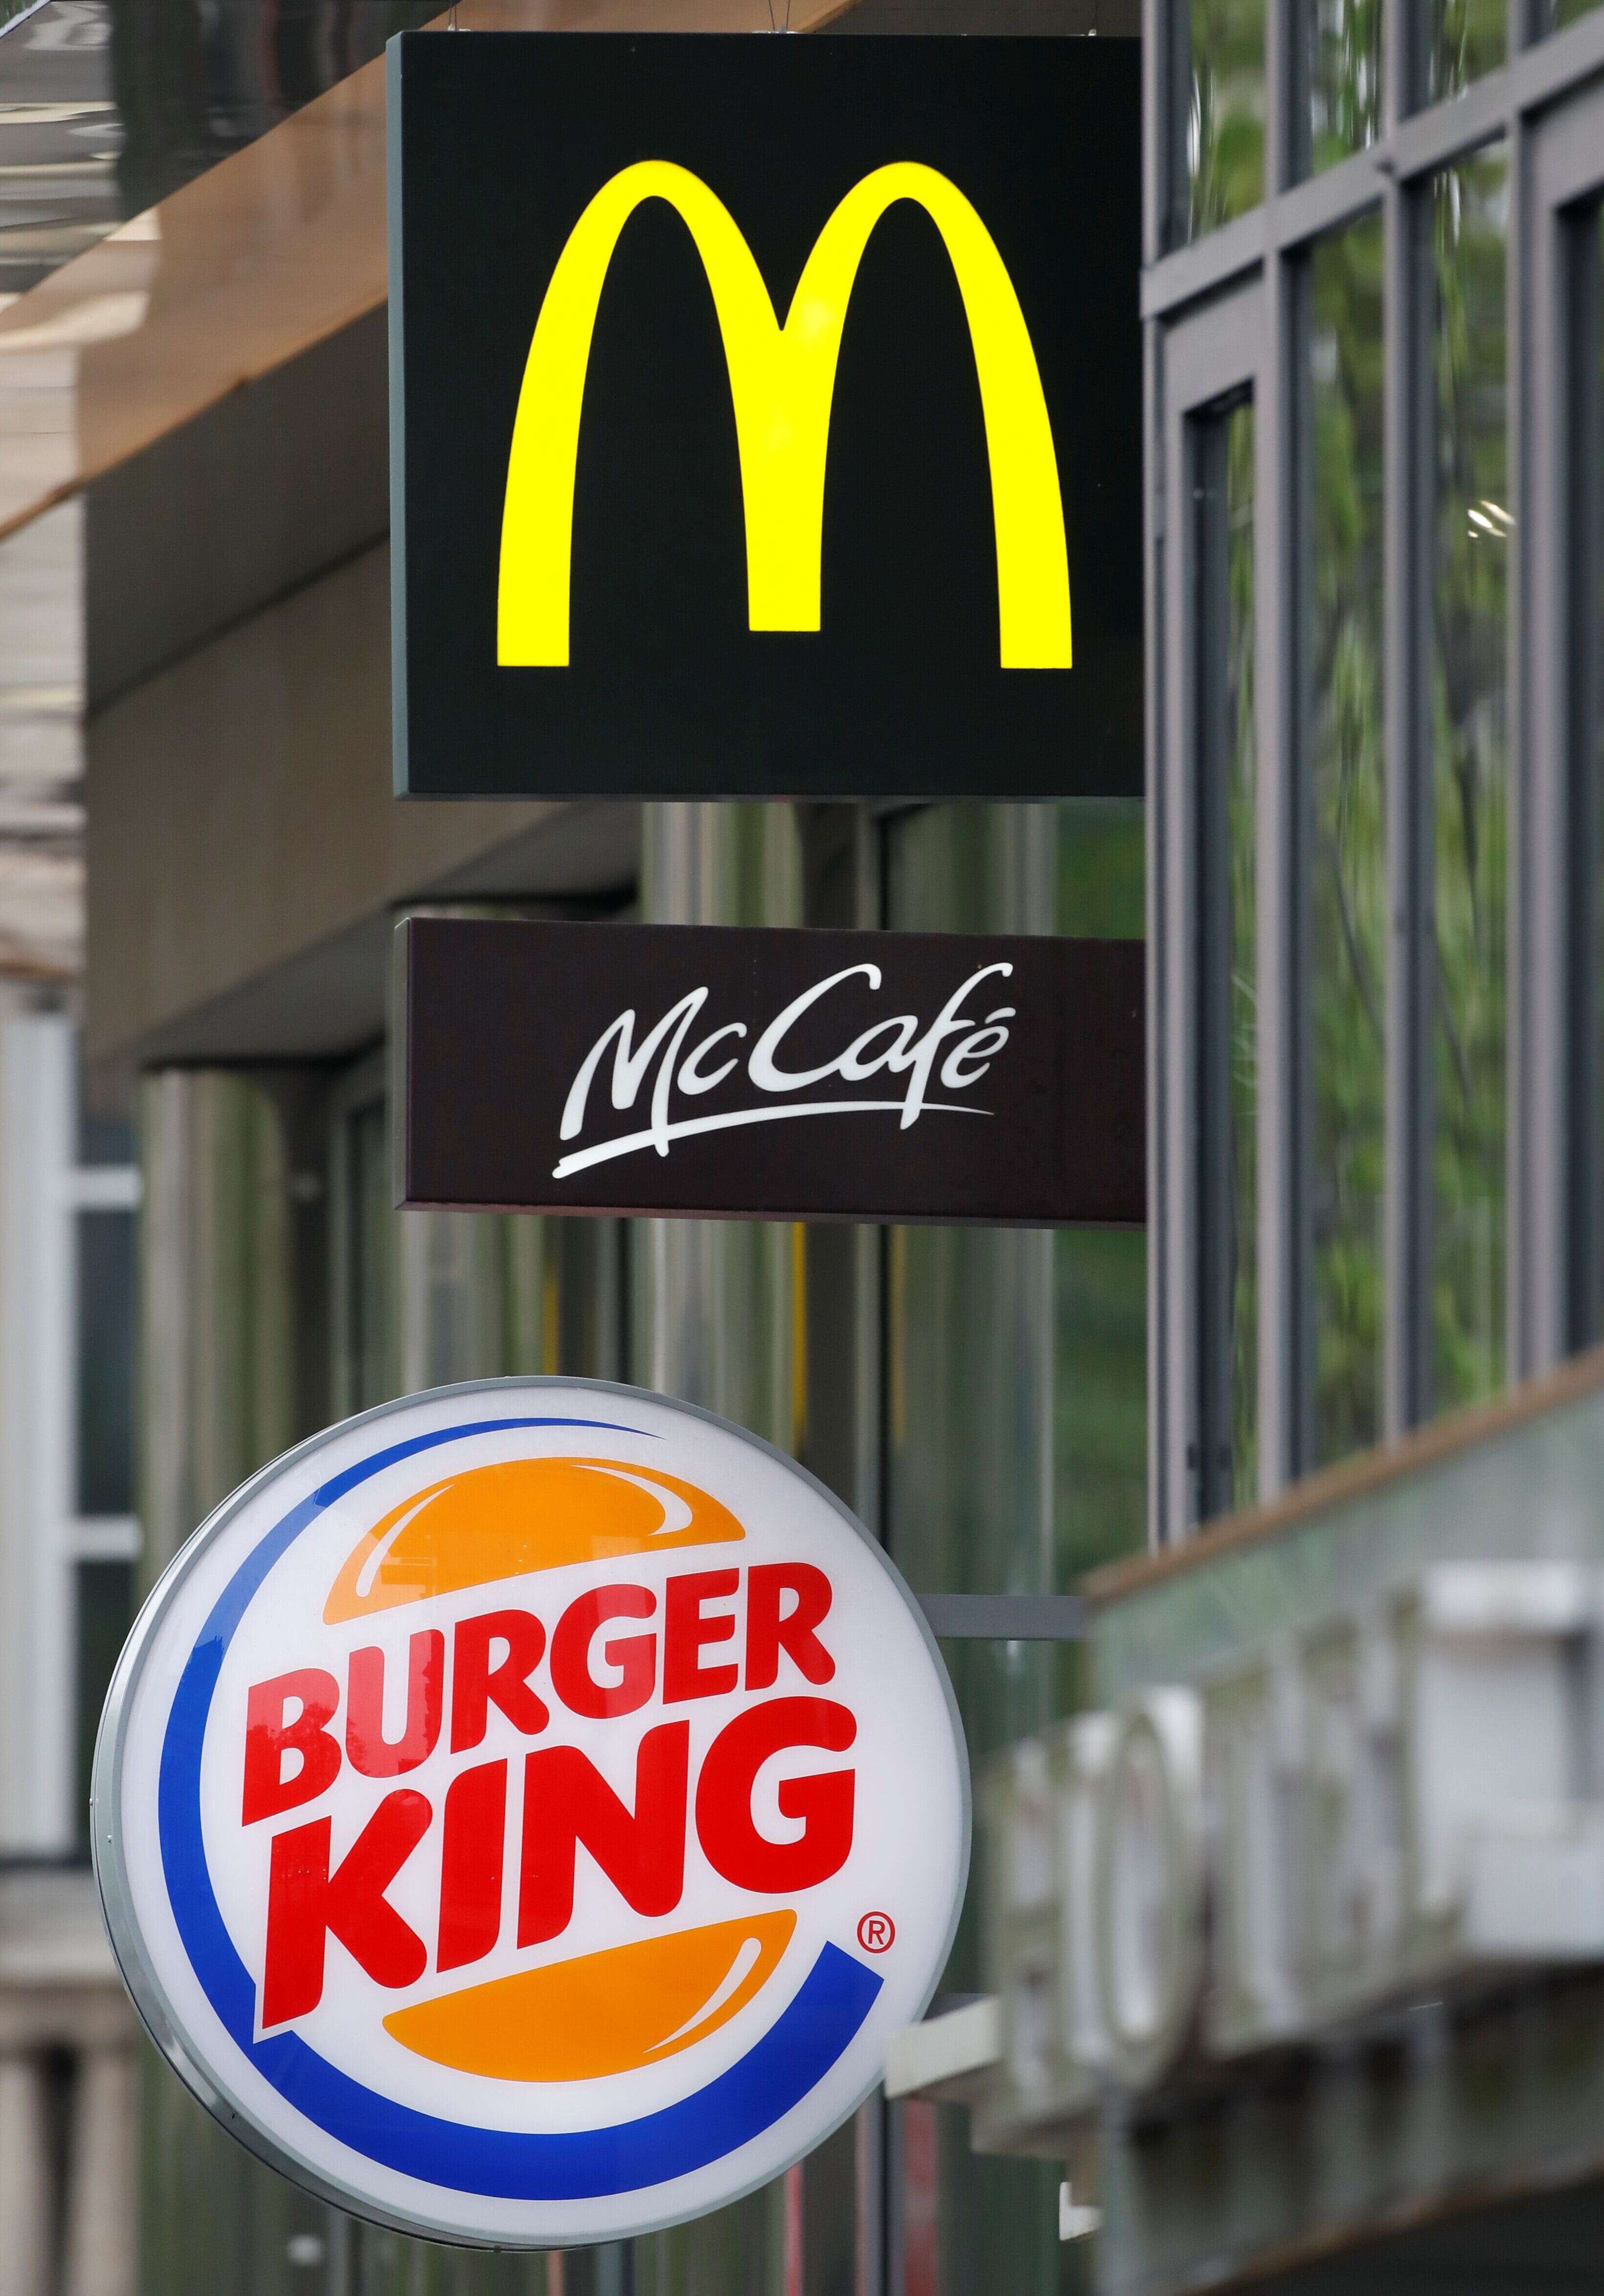 Logos of fast food chains McDonald's and Burger King are seen in front of their restaurants in Paris, France, April 10, 2019. REUTERS/Christian Hartmann